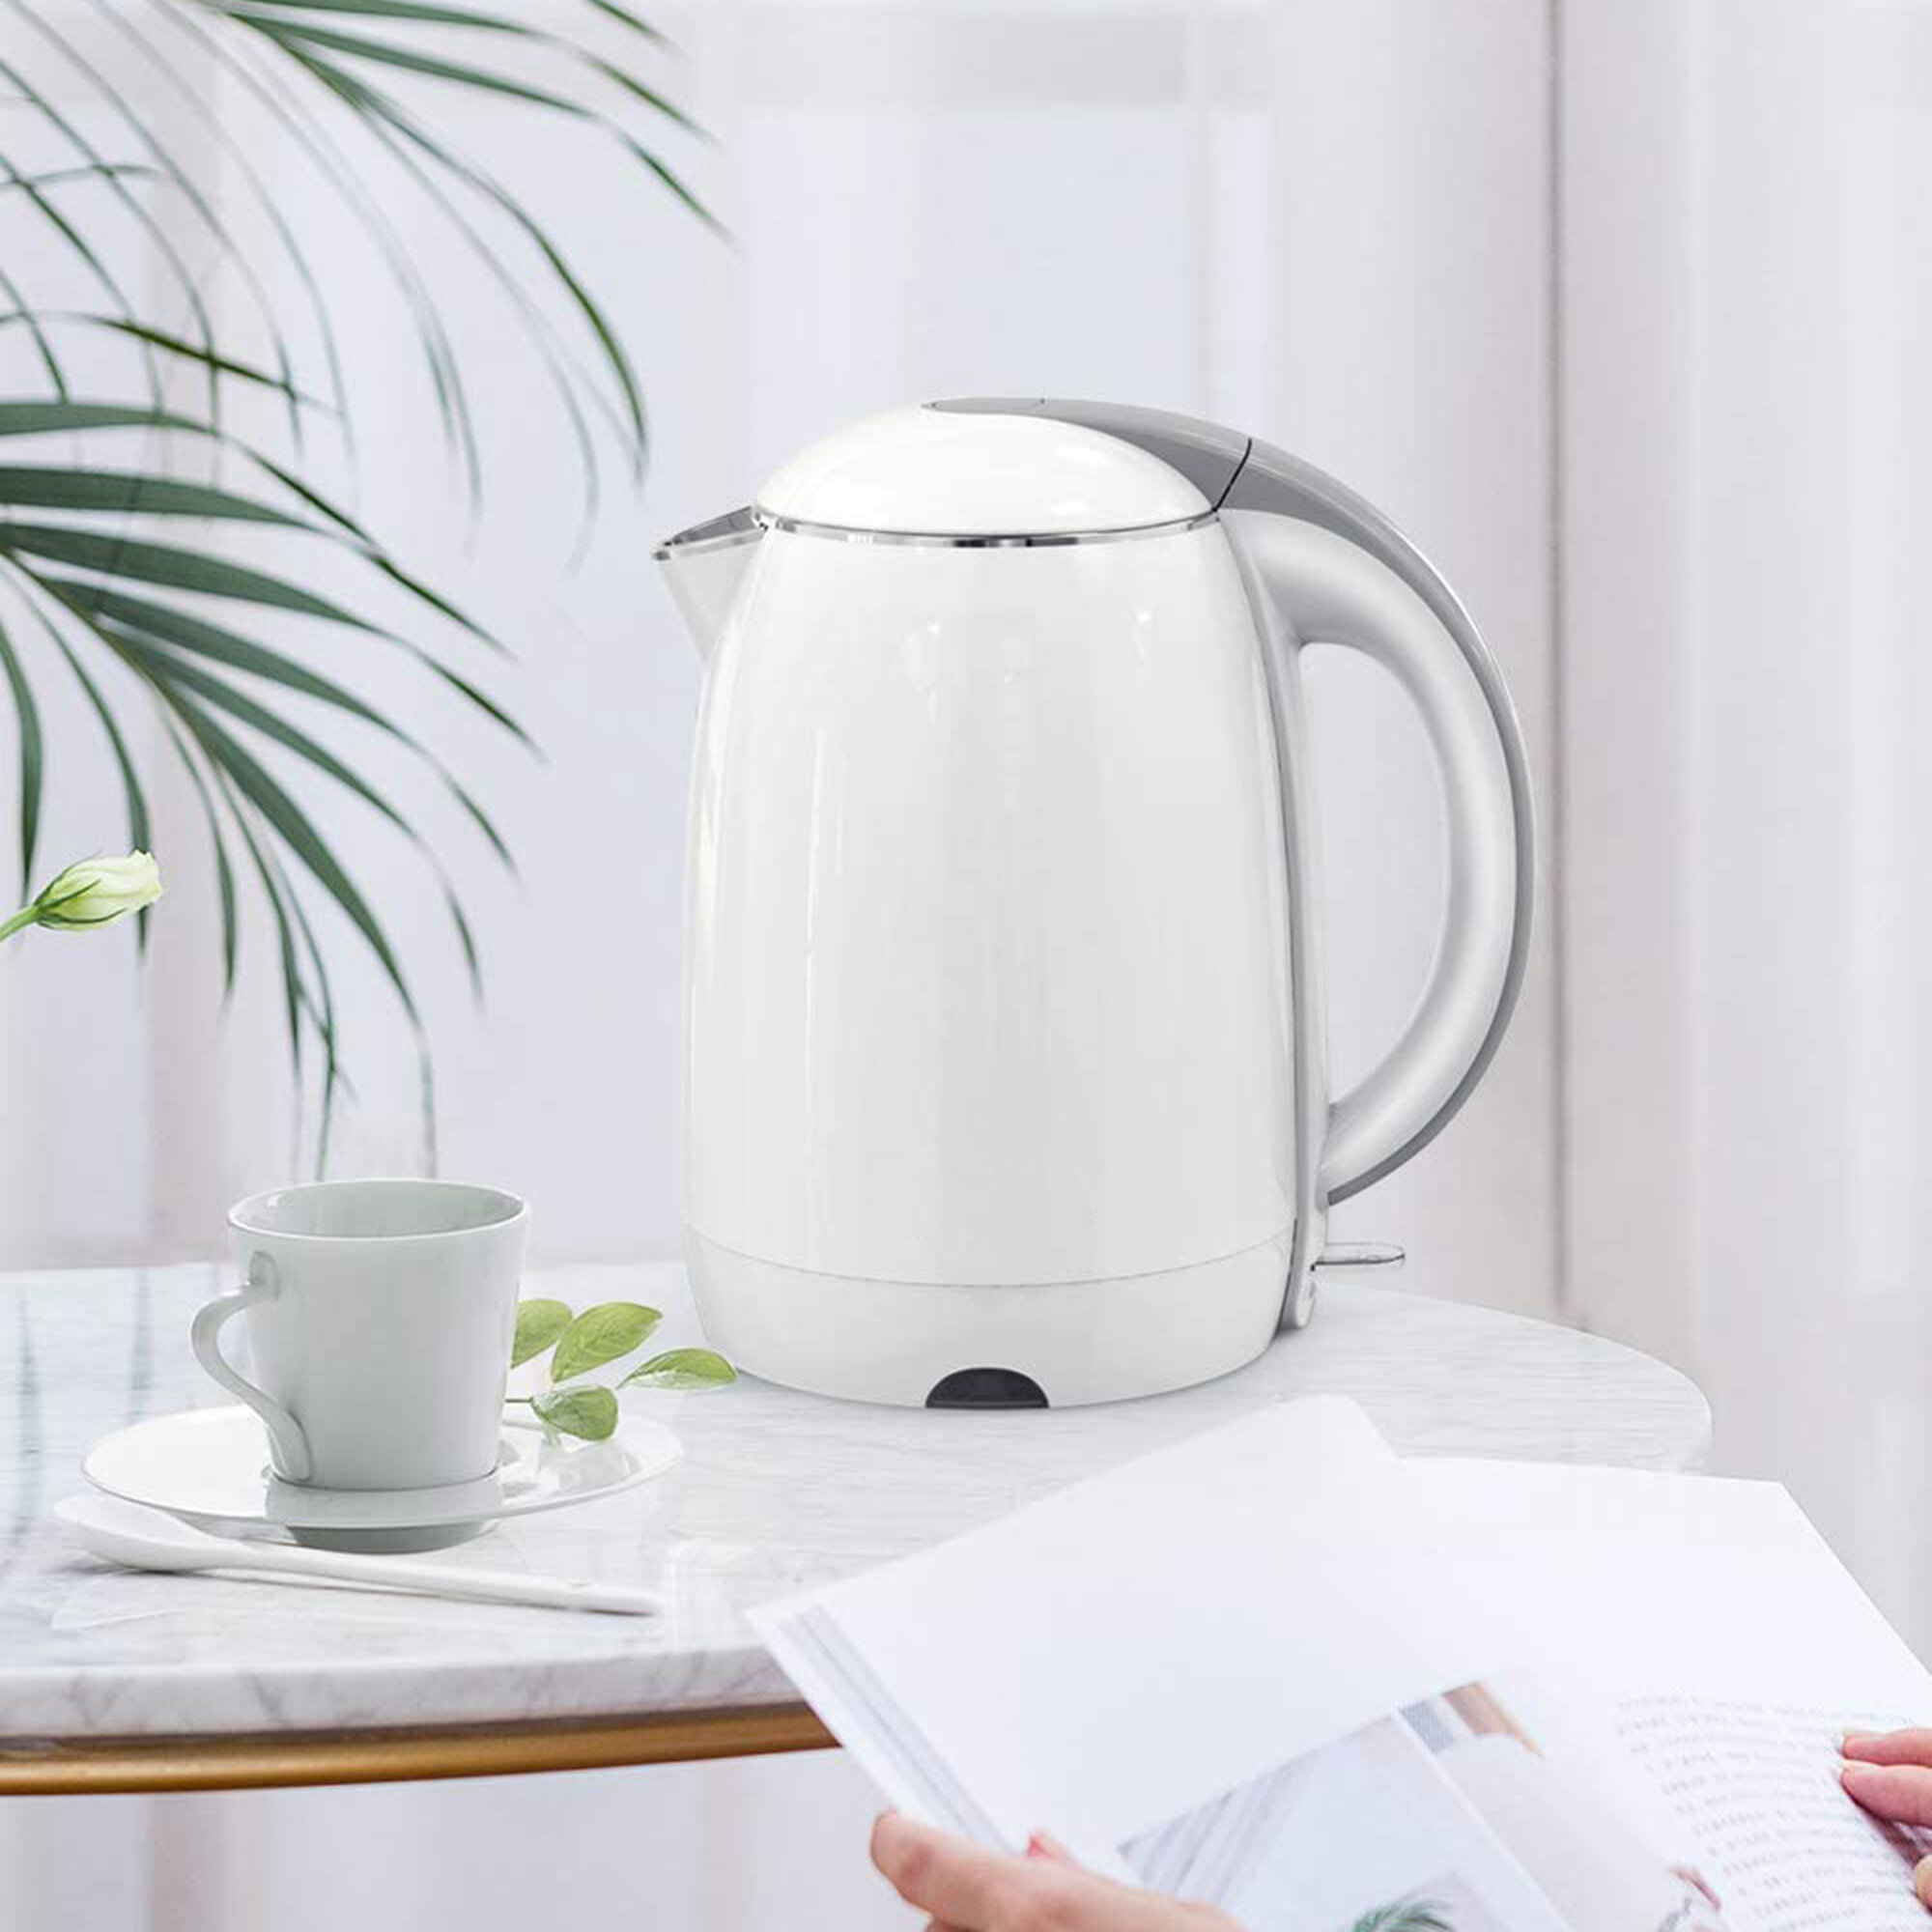 1500W Automatic Shutoff Electric Kettle ASCOT Stainless Steel Electric Tea Kettle BPA-Free Cordless 1.7QT Matte Silver Fast Boiling Water Heater 